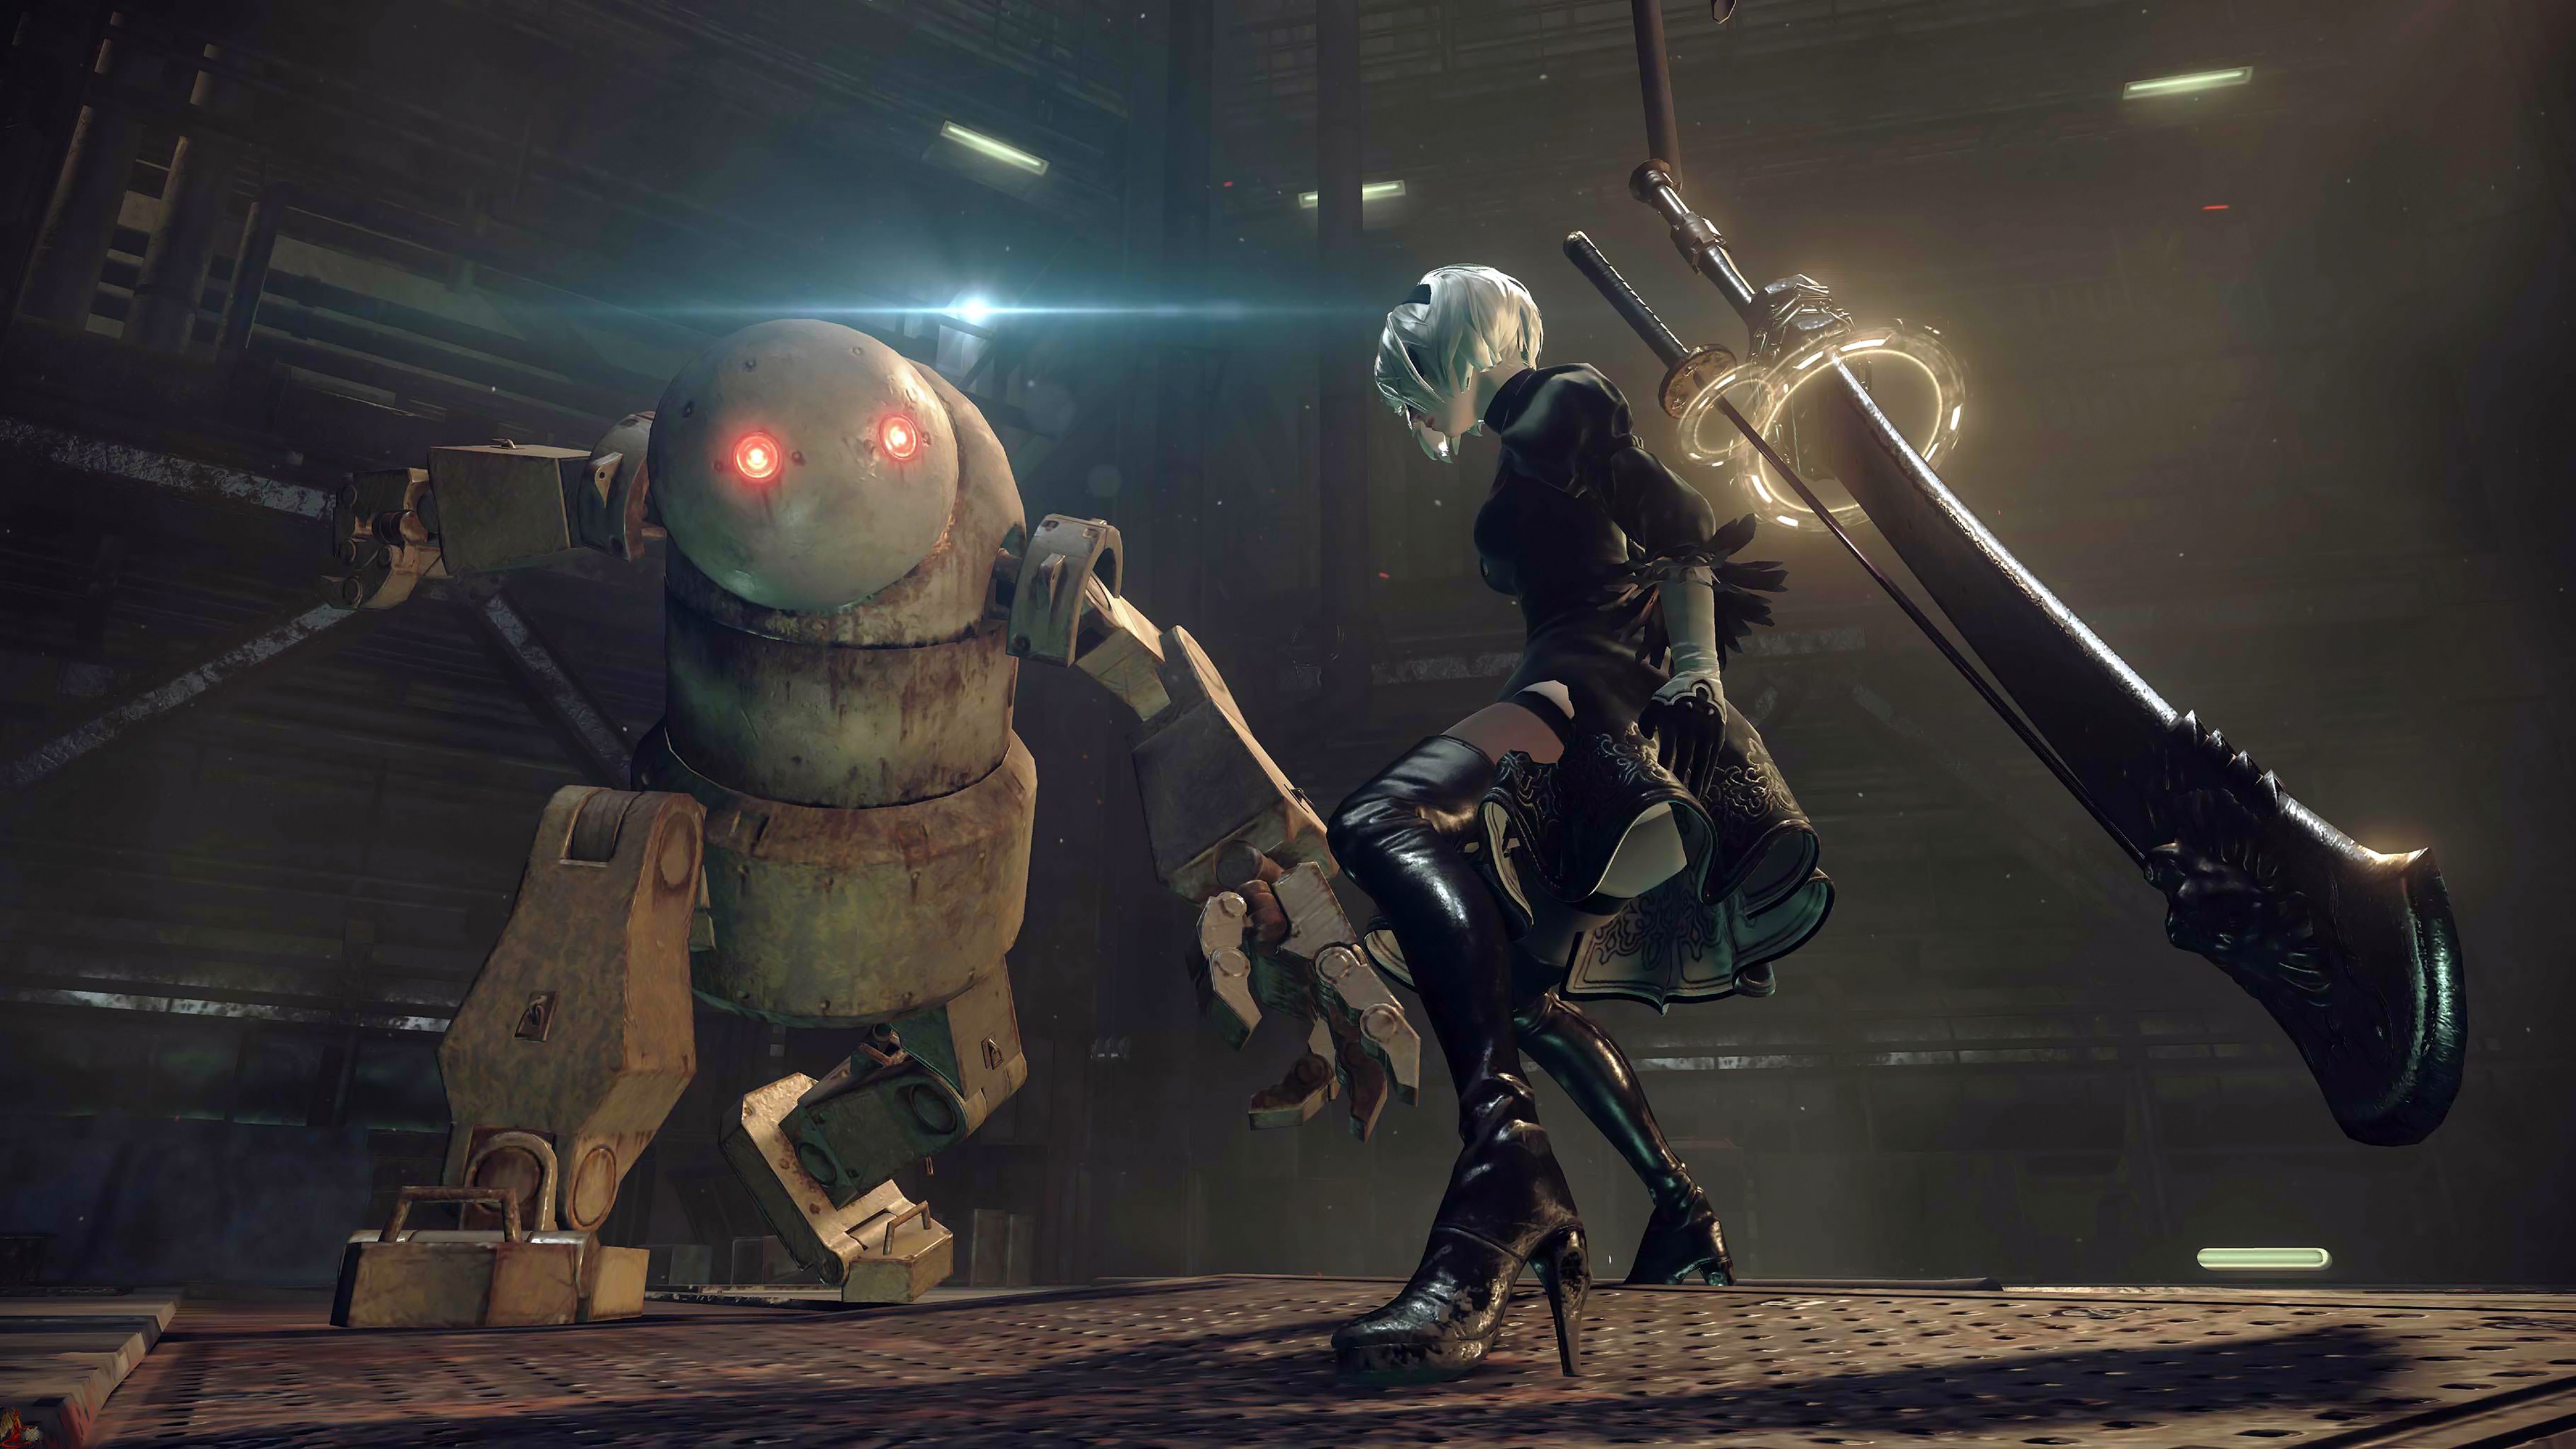 General 3840x2160 Nier: Automata 2B (Nier: Automata) white hair short hair black dress frill dress frills thigh high boots high heeled boots leather boots Leather gloves sword robot video games video game characters video game girls Platinum games Square Enix